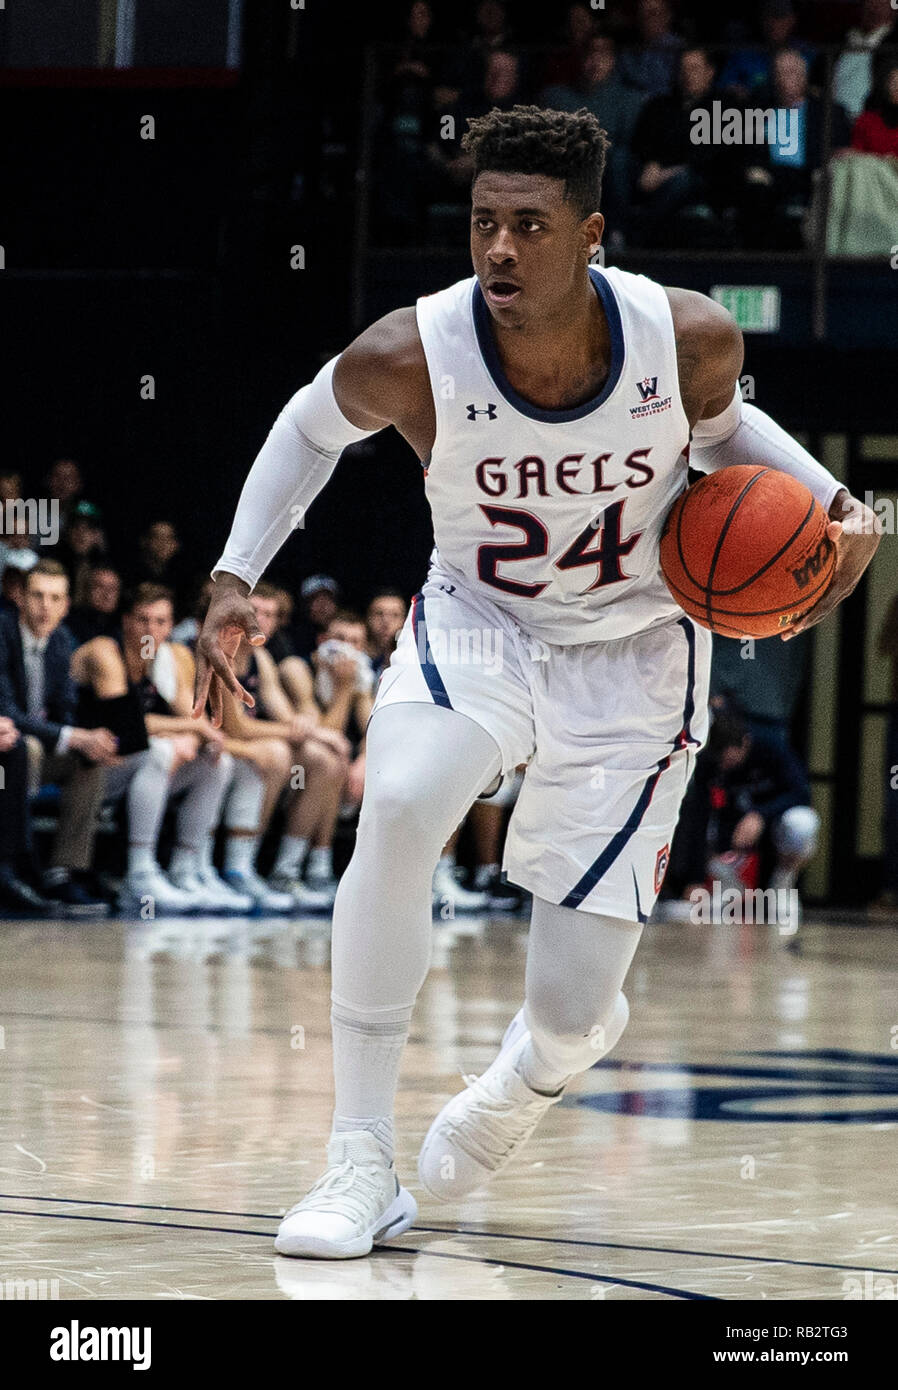 Moraga, CA U.S. 05th Jan, 2019. A. St. Mary's forward Malik Fitts (24)brings the ball up court during the NCAA Men's Basketball game between Brigham Young Cougars and the Saint Mary's Gaels 88-66 win at McKeon Pavilion Moraga Calif. Thurman James/CSM/Alamy Live News Stock Photo